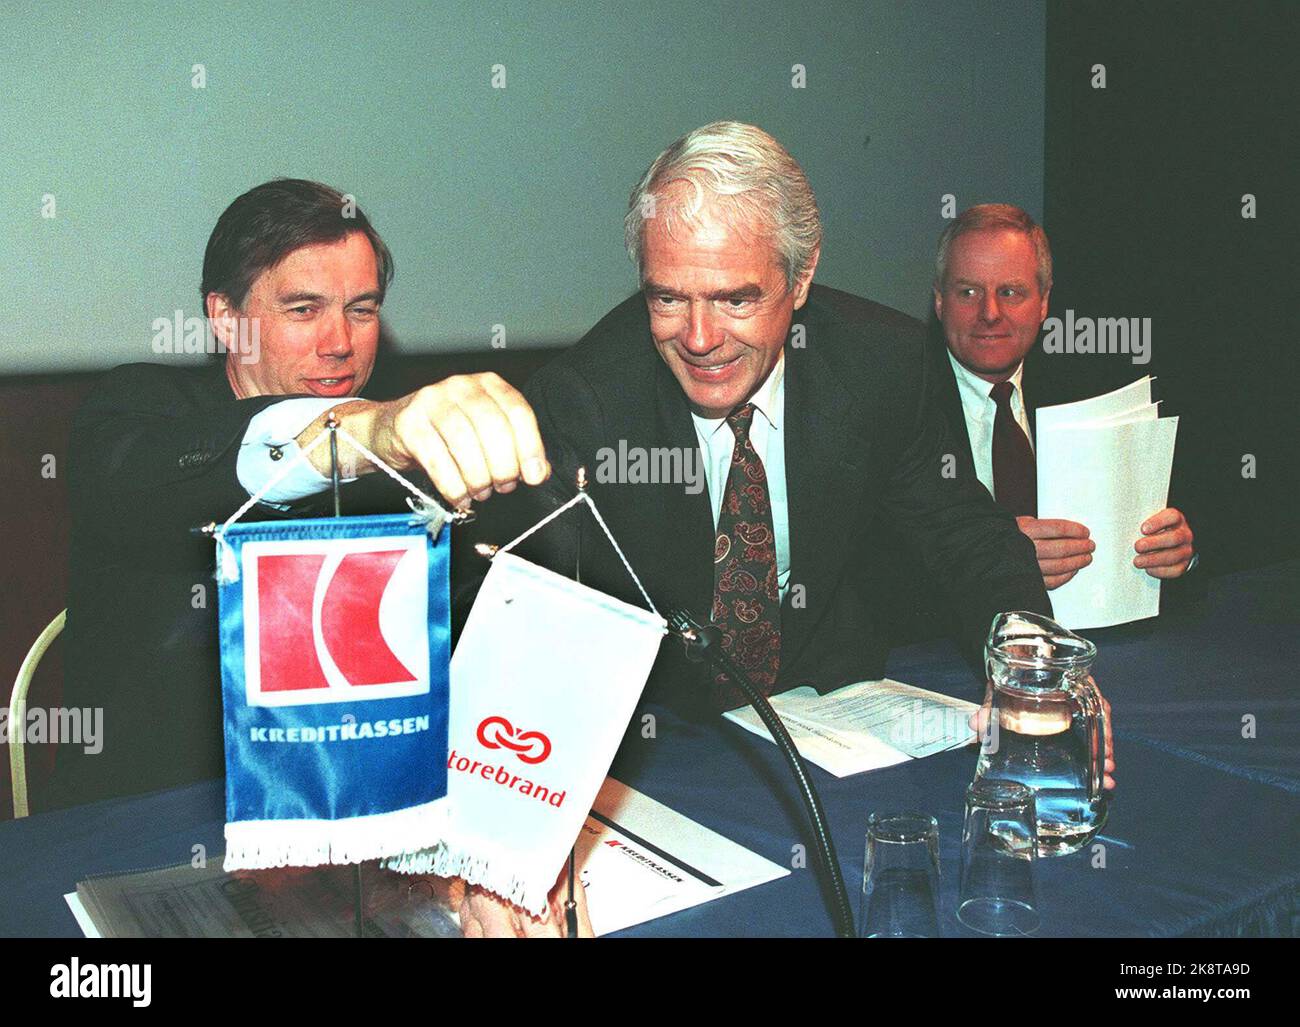 Oslo 19970402 Storebrand and Kreditkassen announced at a press conference that they would merge into one company named Christiania. Borger A. Lenth is here flanked by Åge Korsvold (TV) and Tom Ruud. Photo: Bjørn Sigurdsøn / NTB / NTB Stock Photo